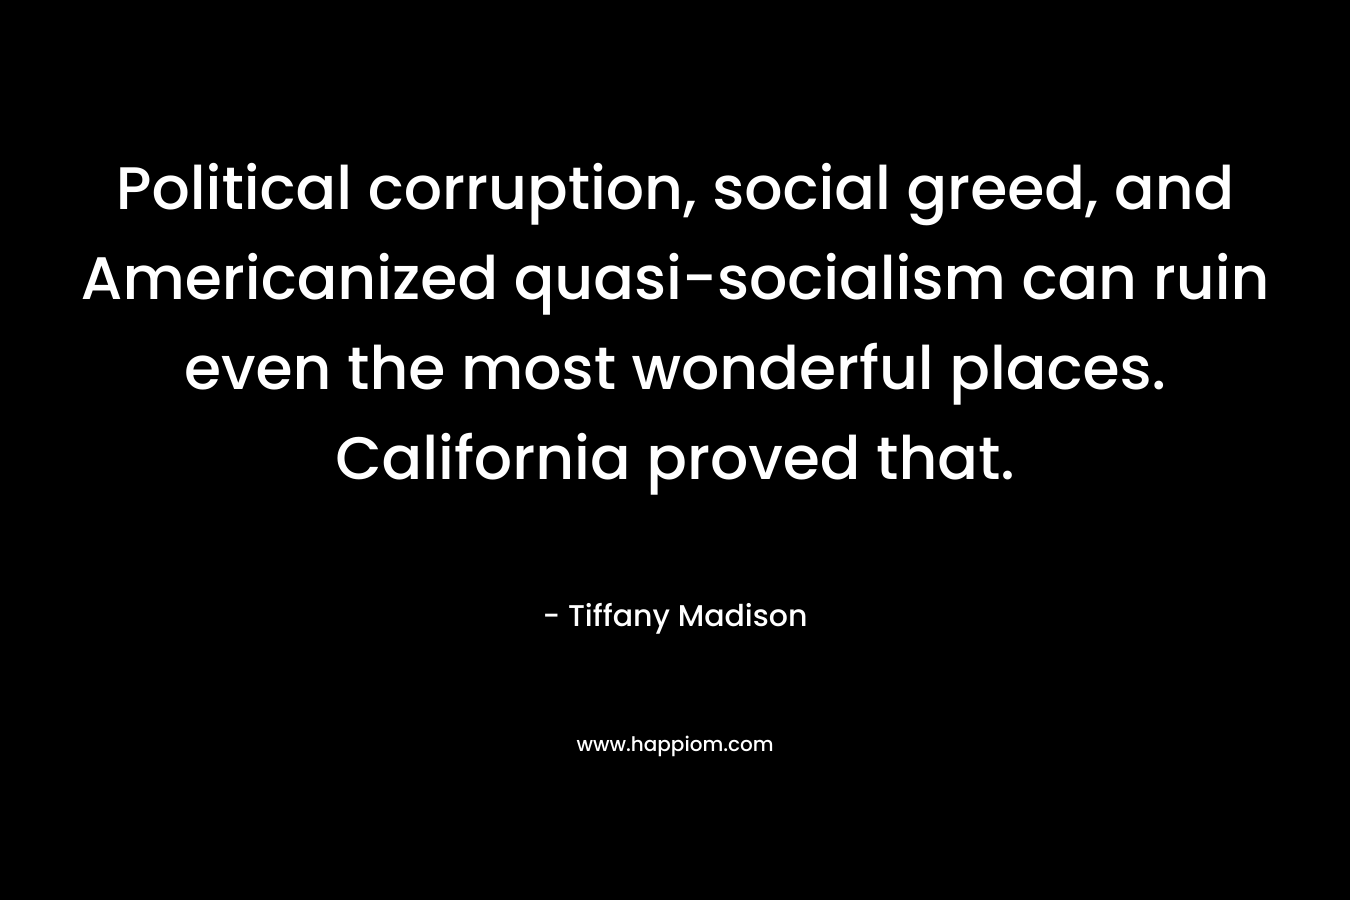 Political corruption, social greed, and Americanized quasi-socialism can ruin even the most wonderful places. California proved that.